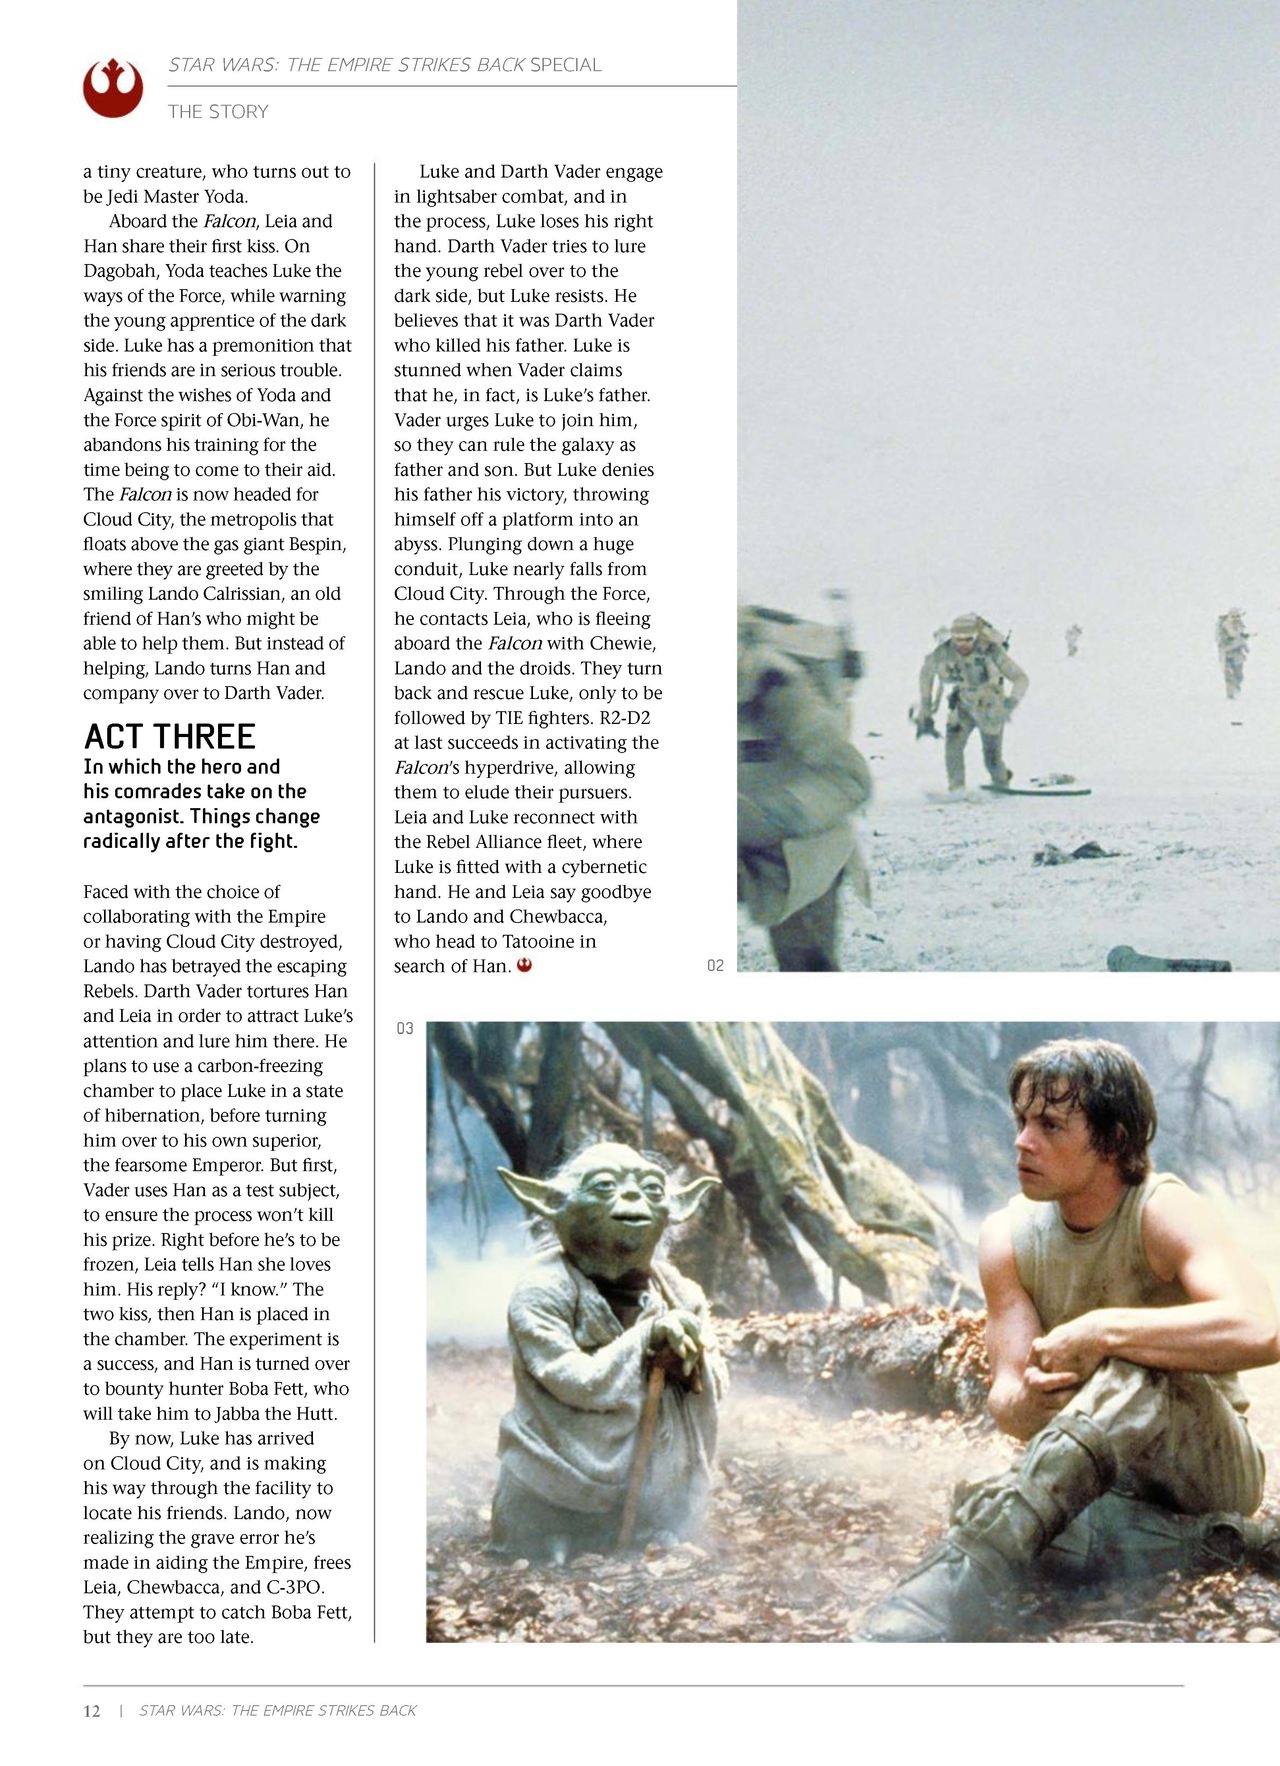 Star Wars - The Empire Strikes Back - The 40th Anniversary Special Edition 13